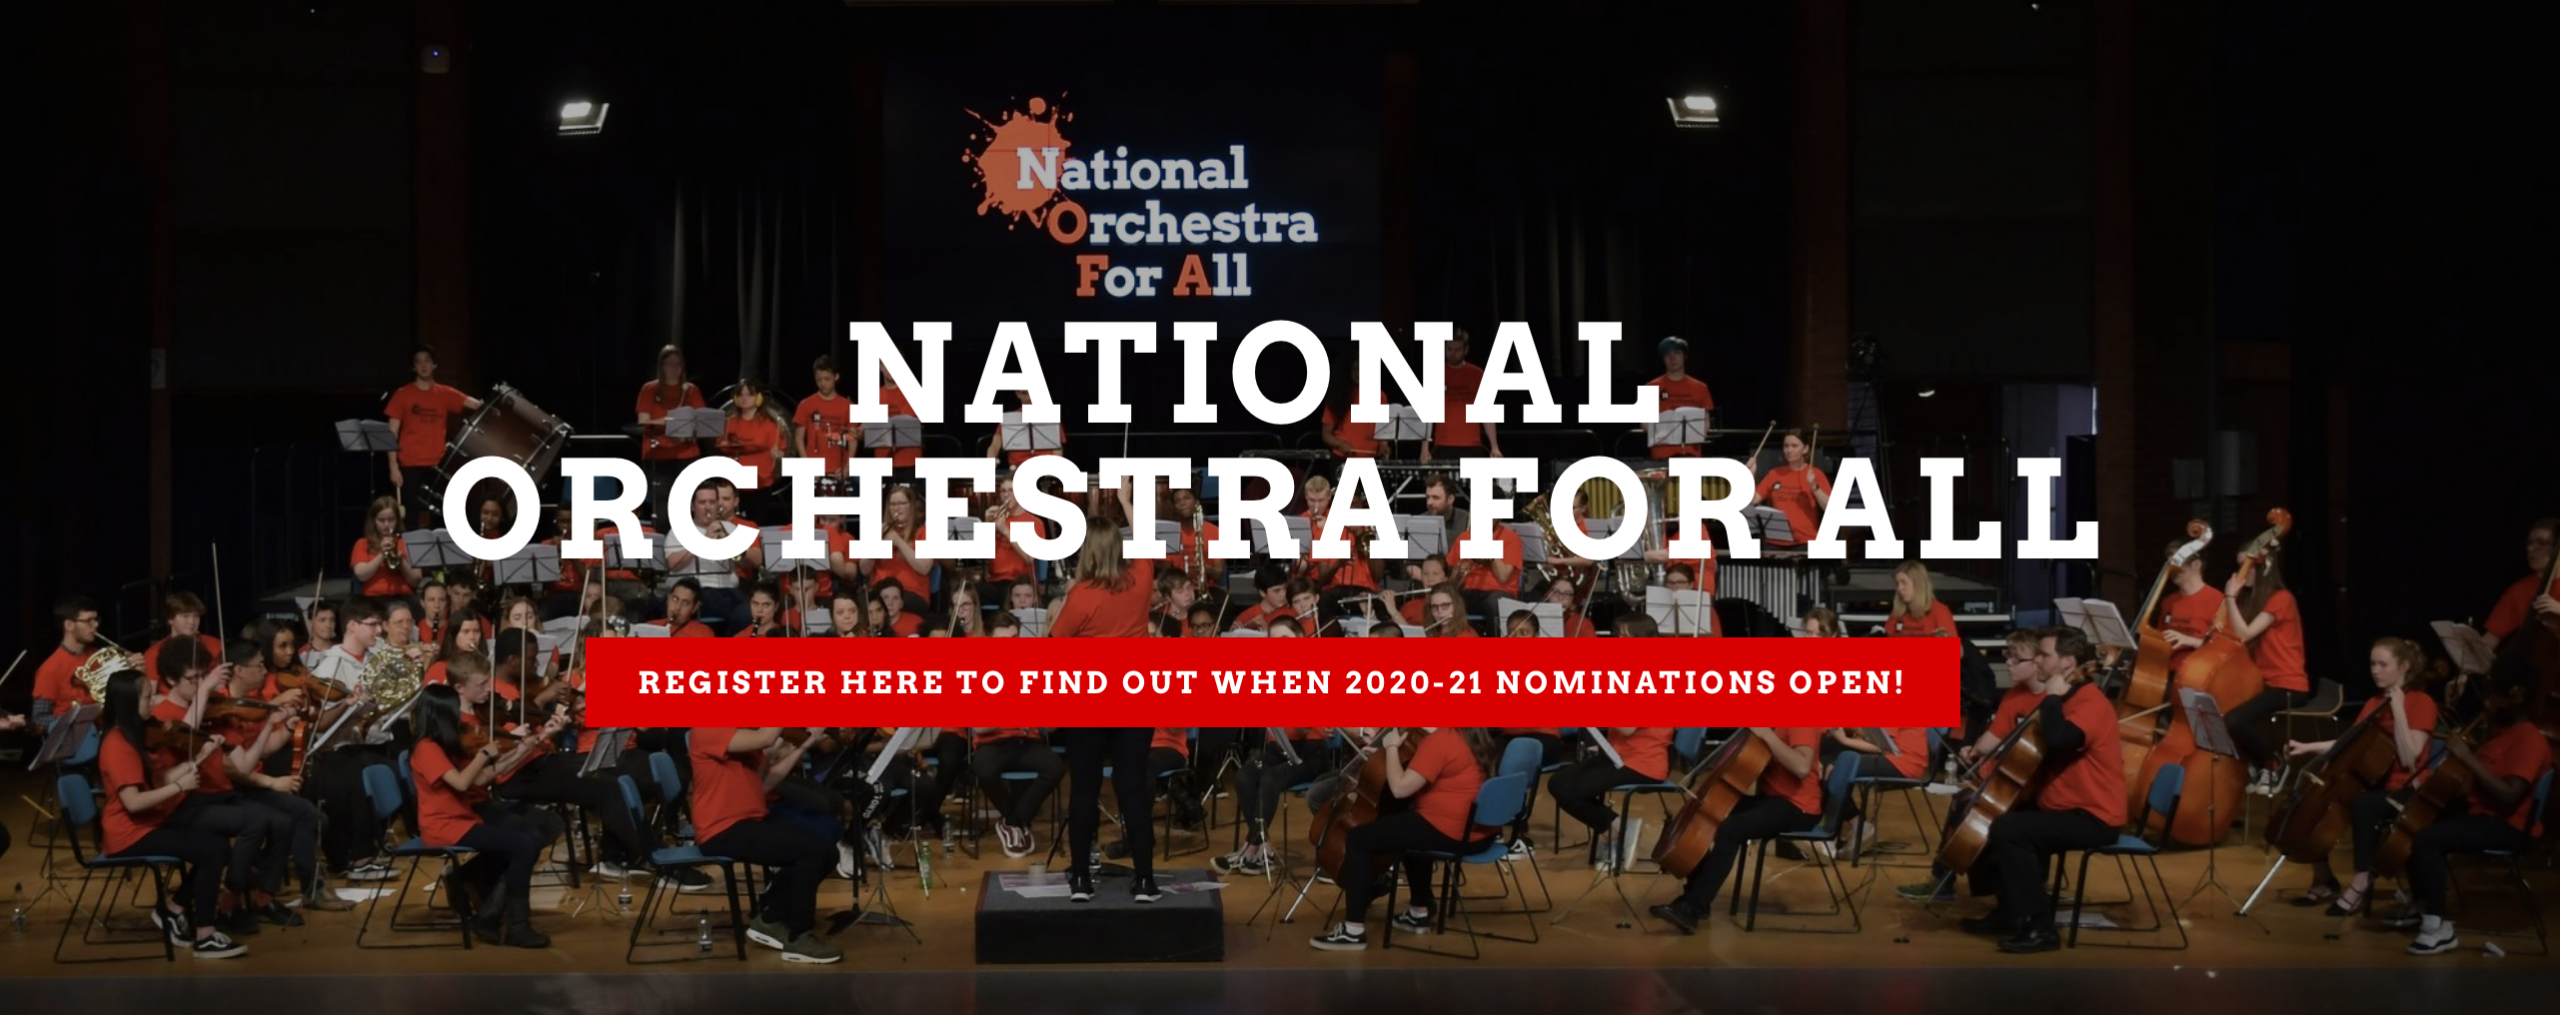 National Orchestra for All